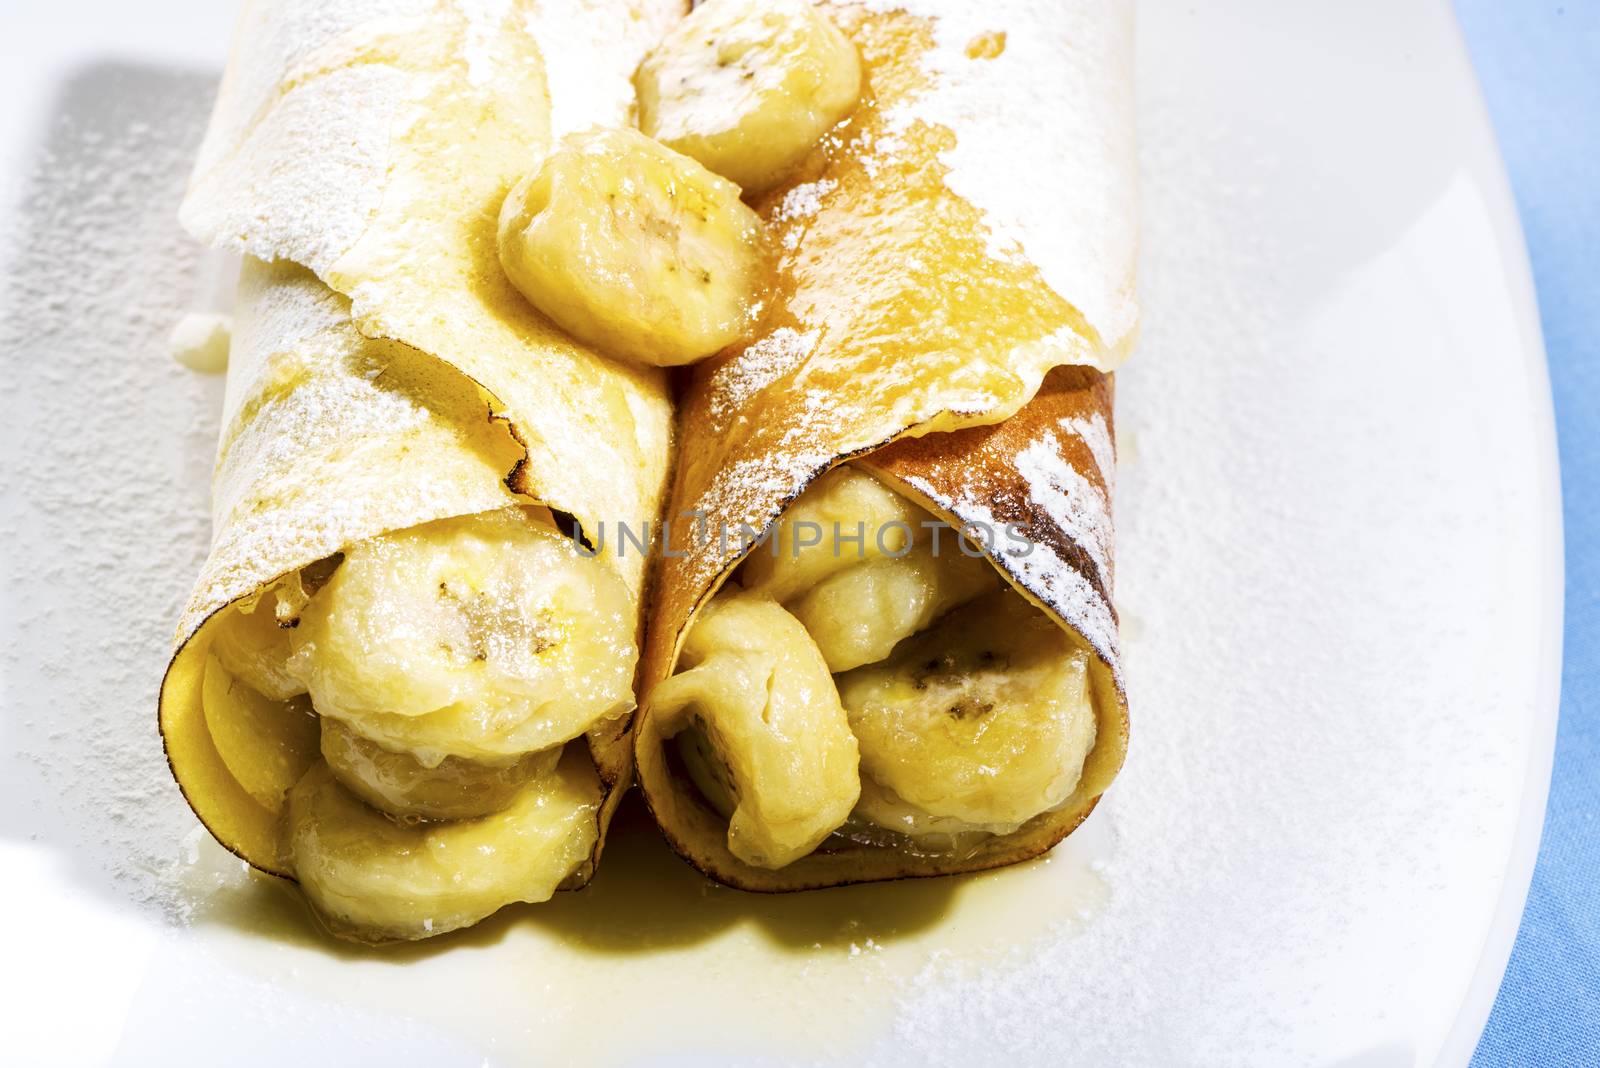 Delicious freshly baked pancakes or crepes filled with banana a gourmet dessert